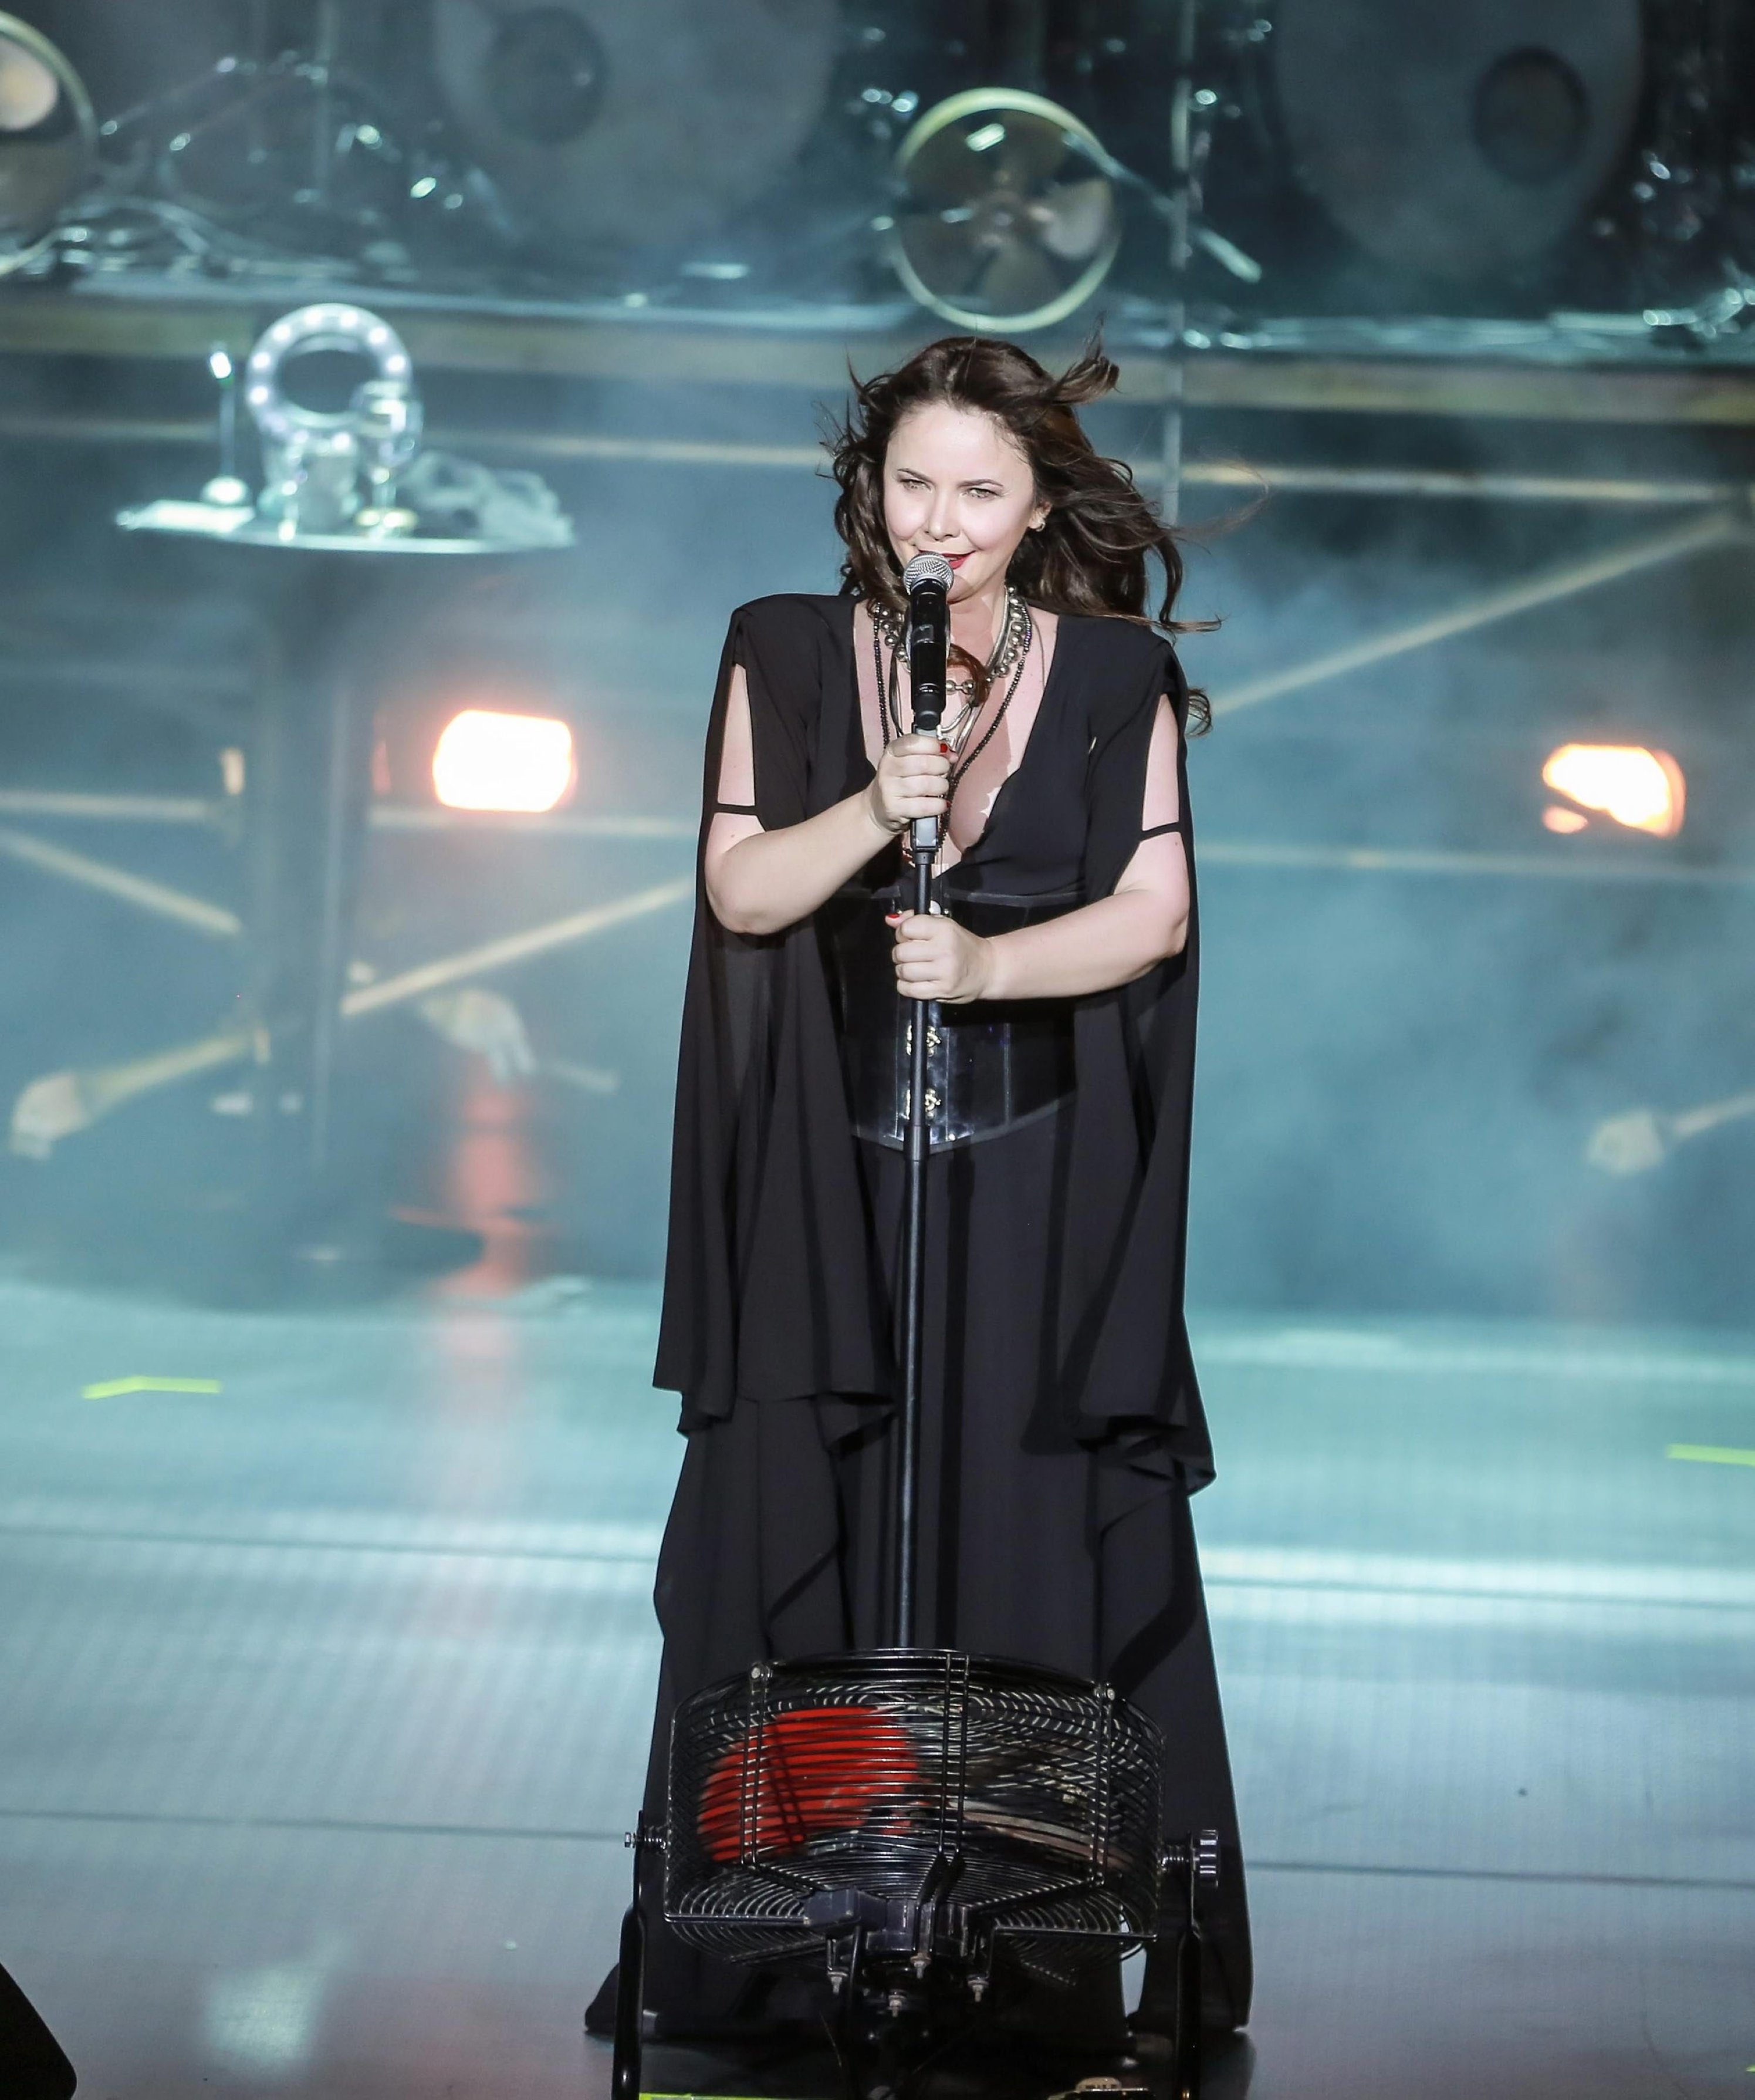 Şebnem Ferah performs at the Cemil Topuzlu Open Air Theater, in Istanbul, Turkey. (Archive Photo)